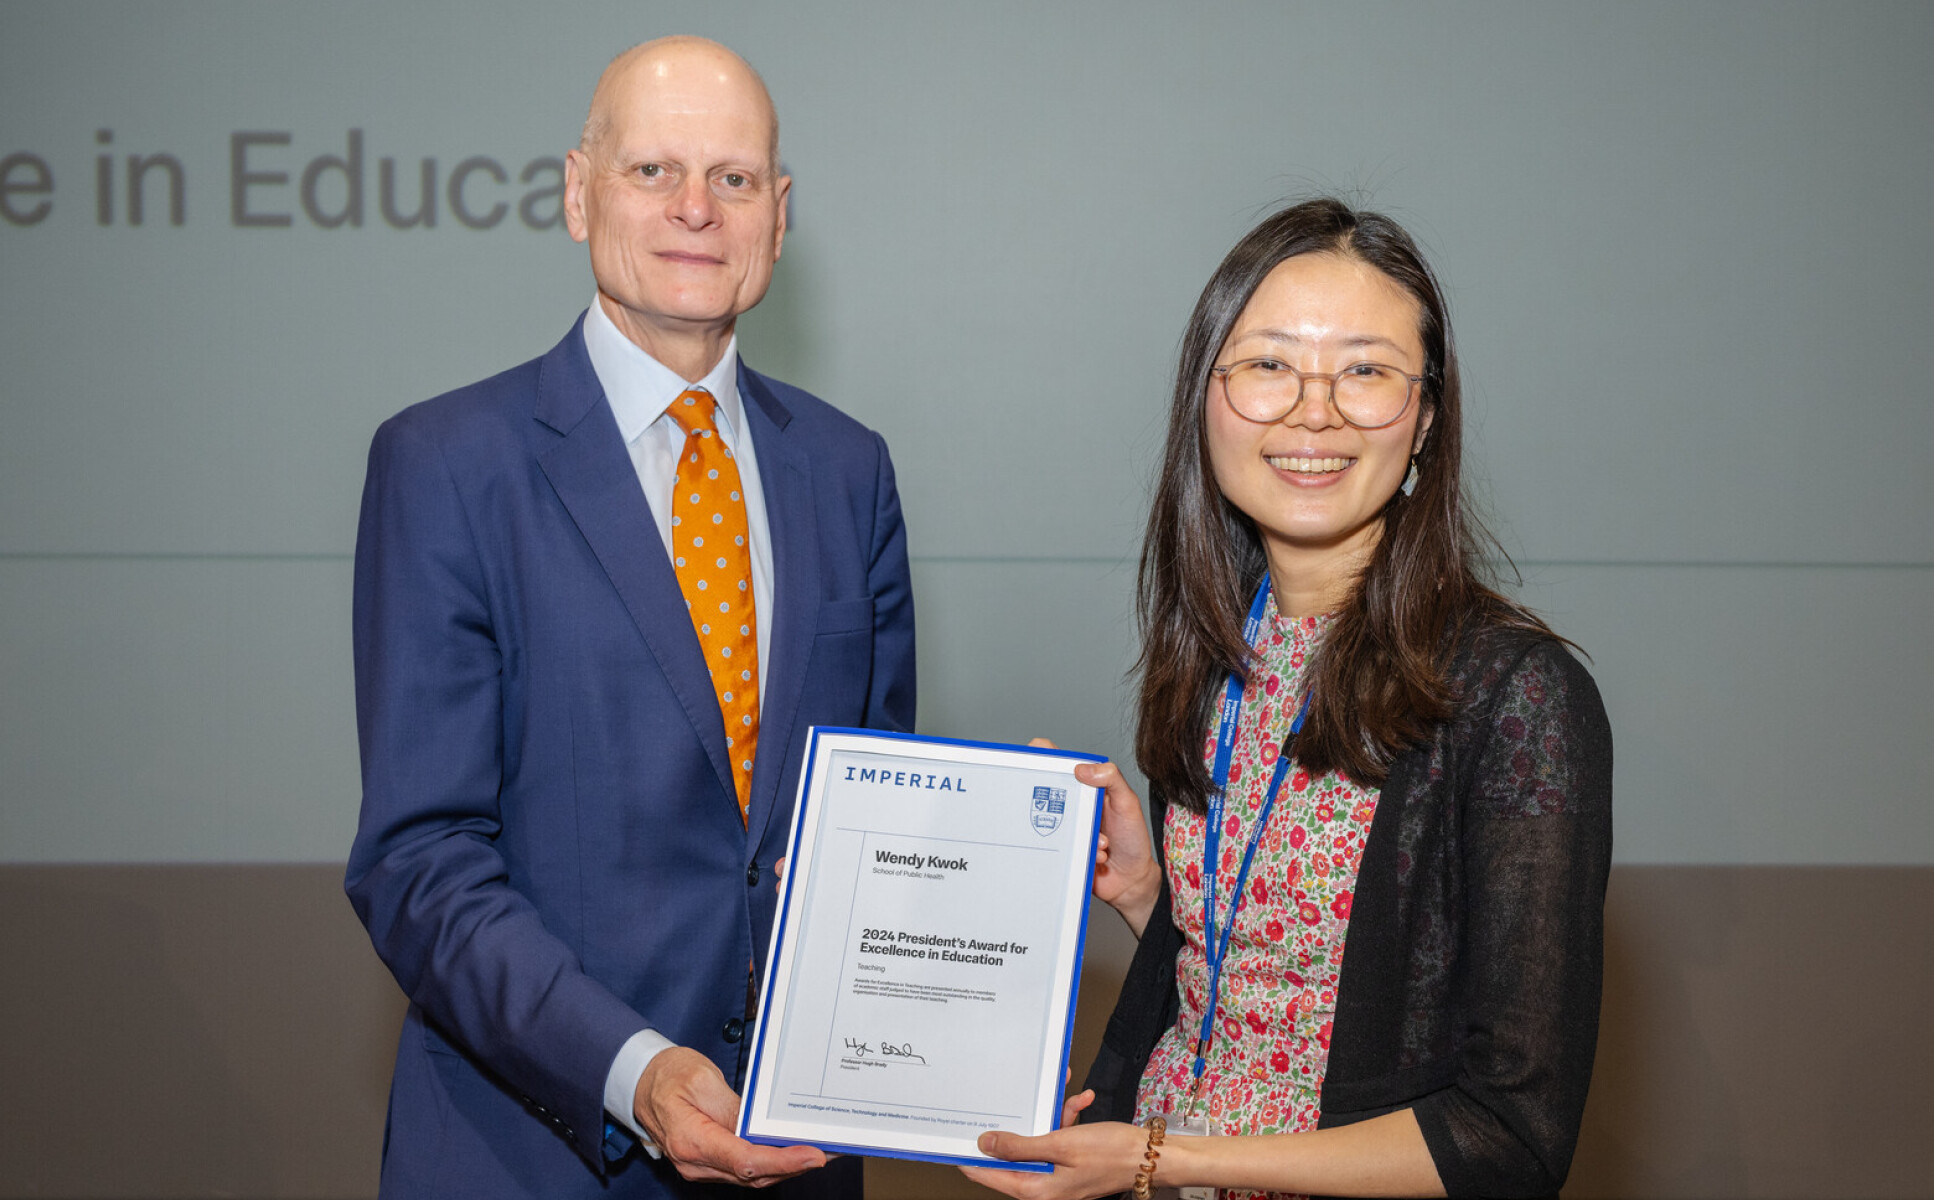 Wendy Kwok receiving her award from Provost Ian Warmsley